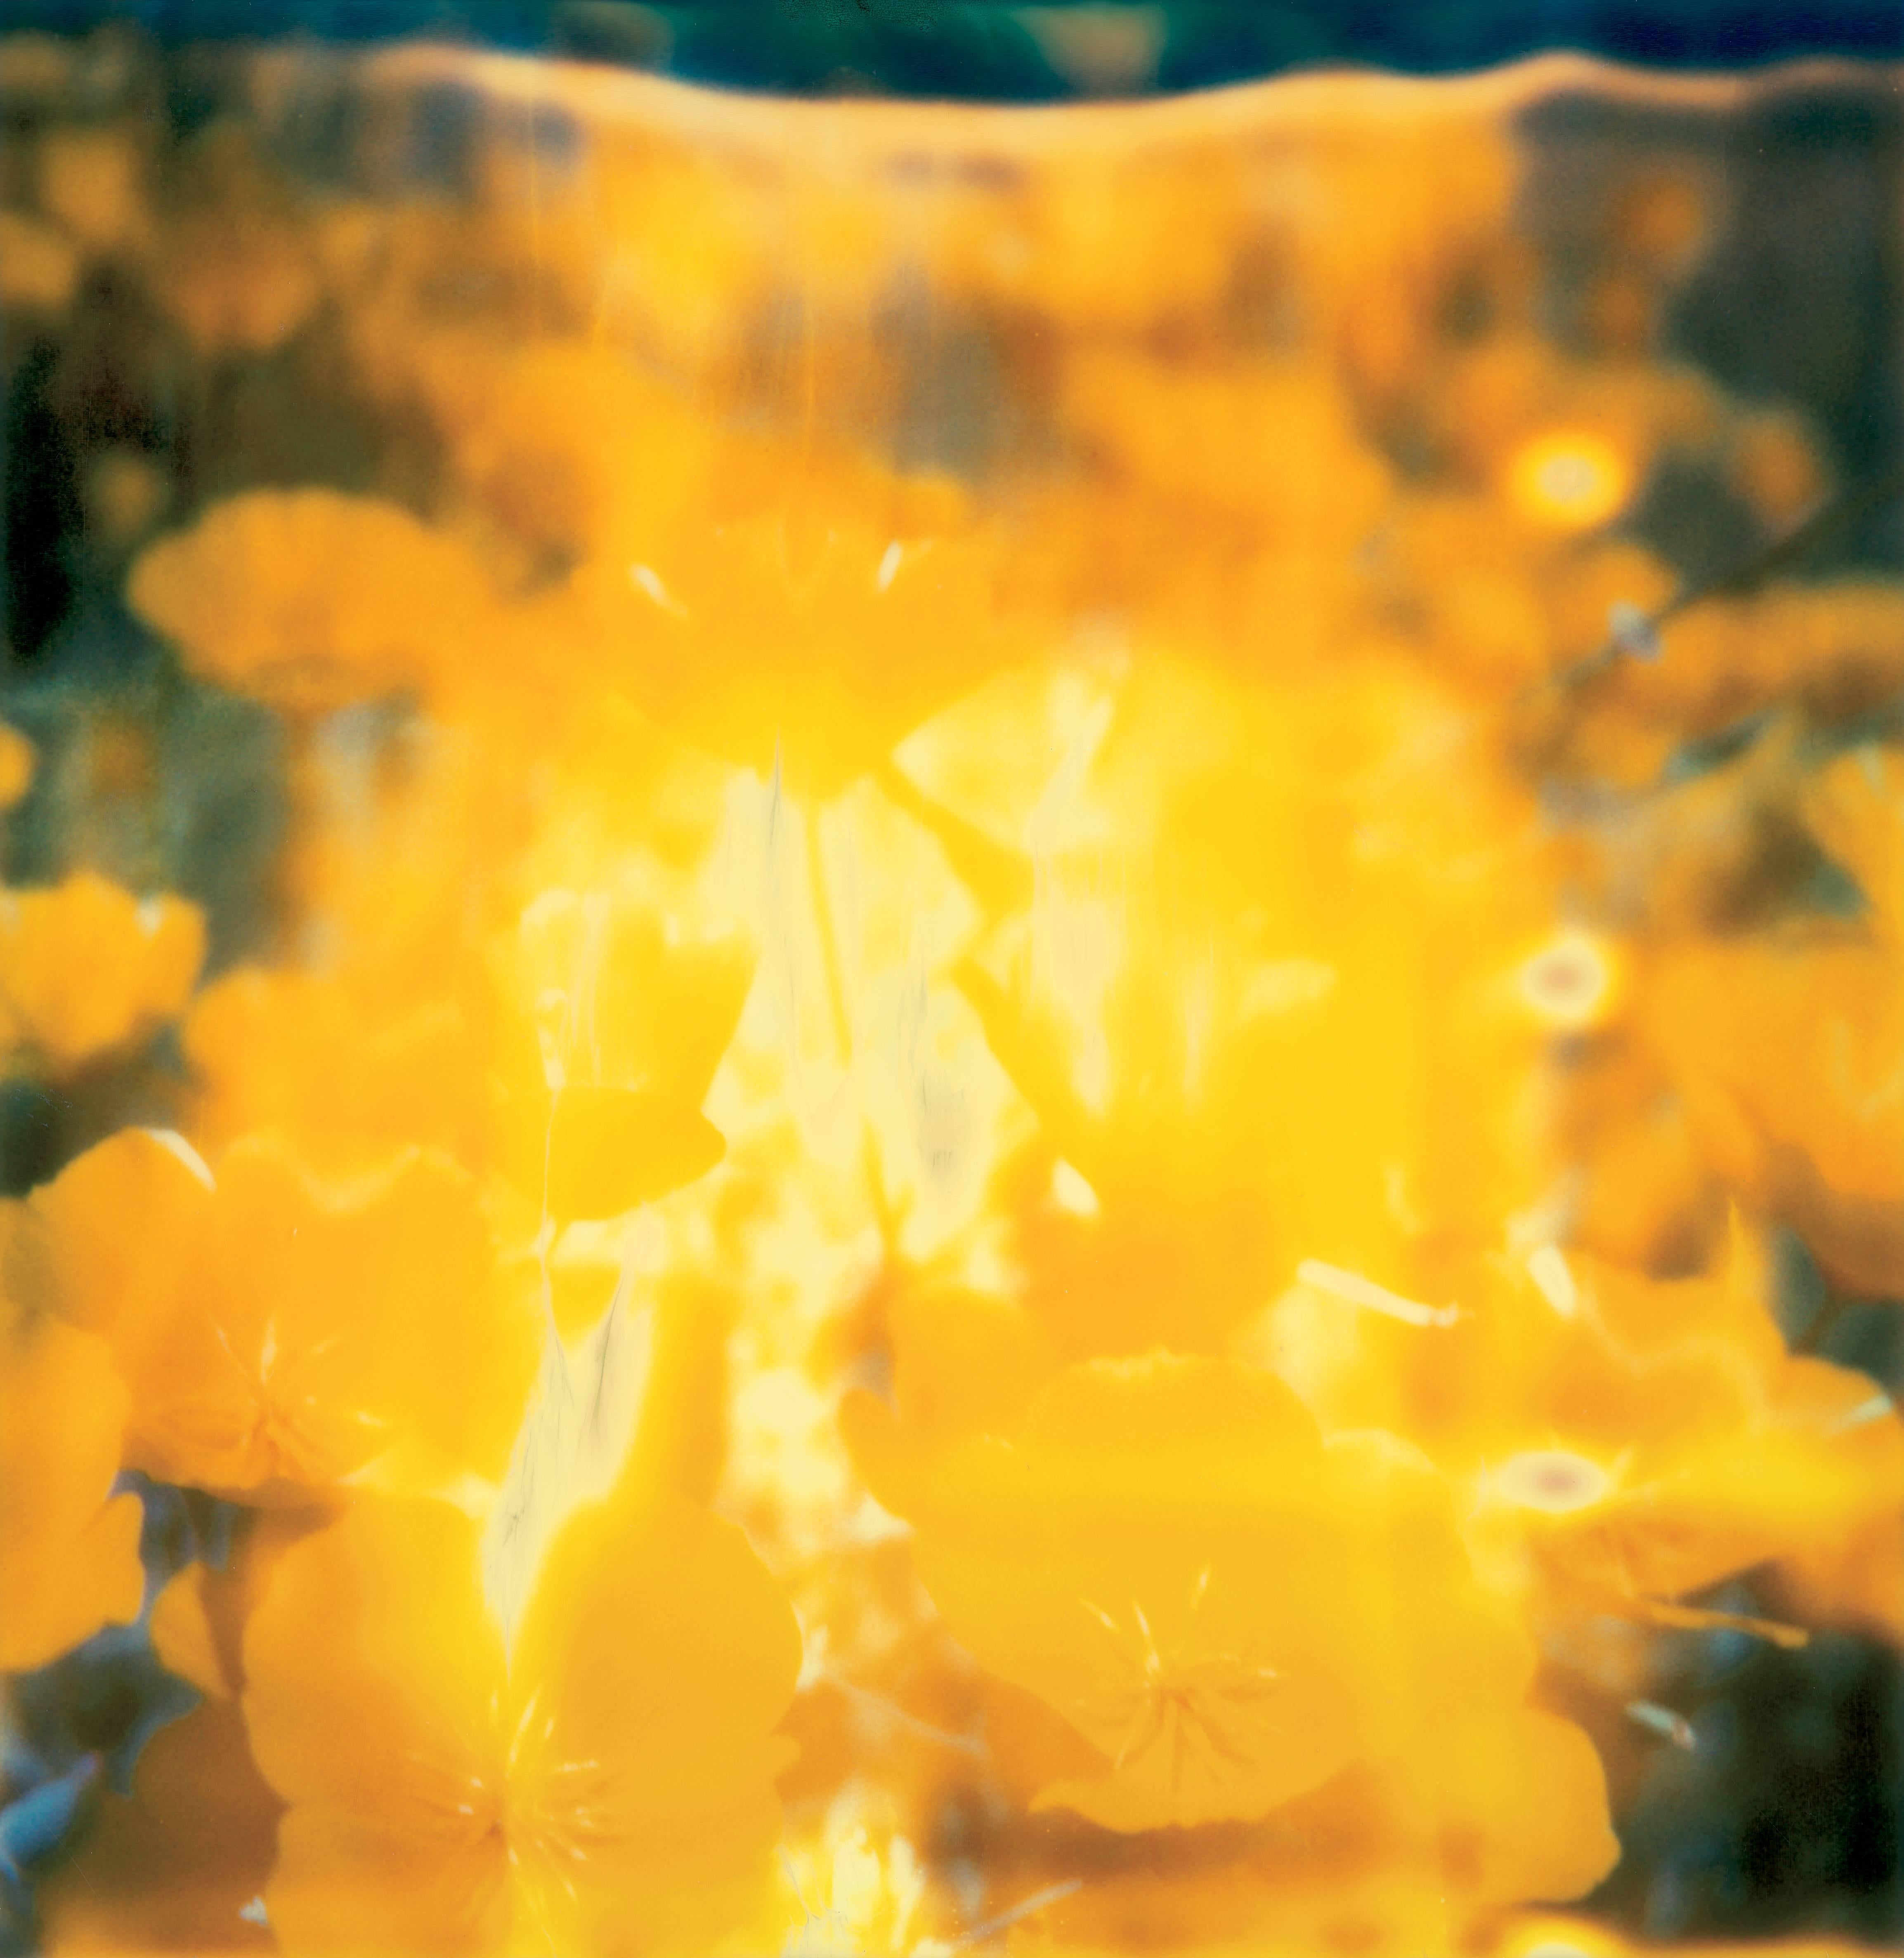 Stefanie Schneider Landscape Photograph - Yellow Flower - Contemporary, Polaroid, Expired, Photograph, Abstract, Close-up